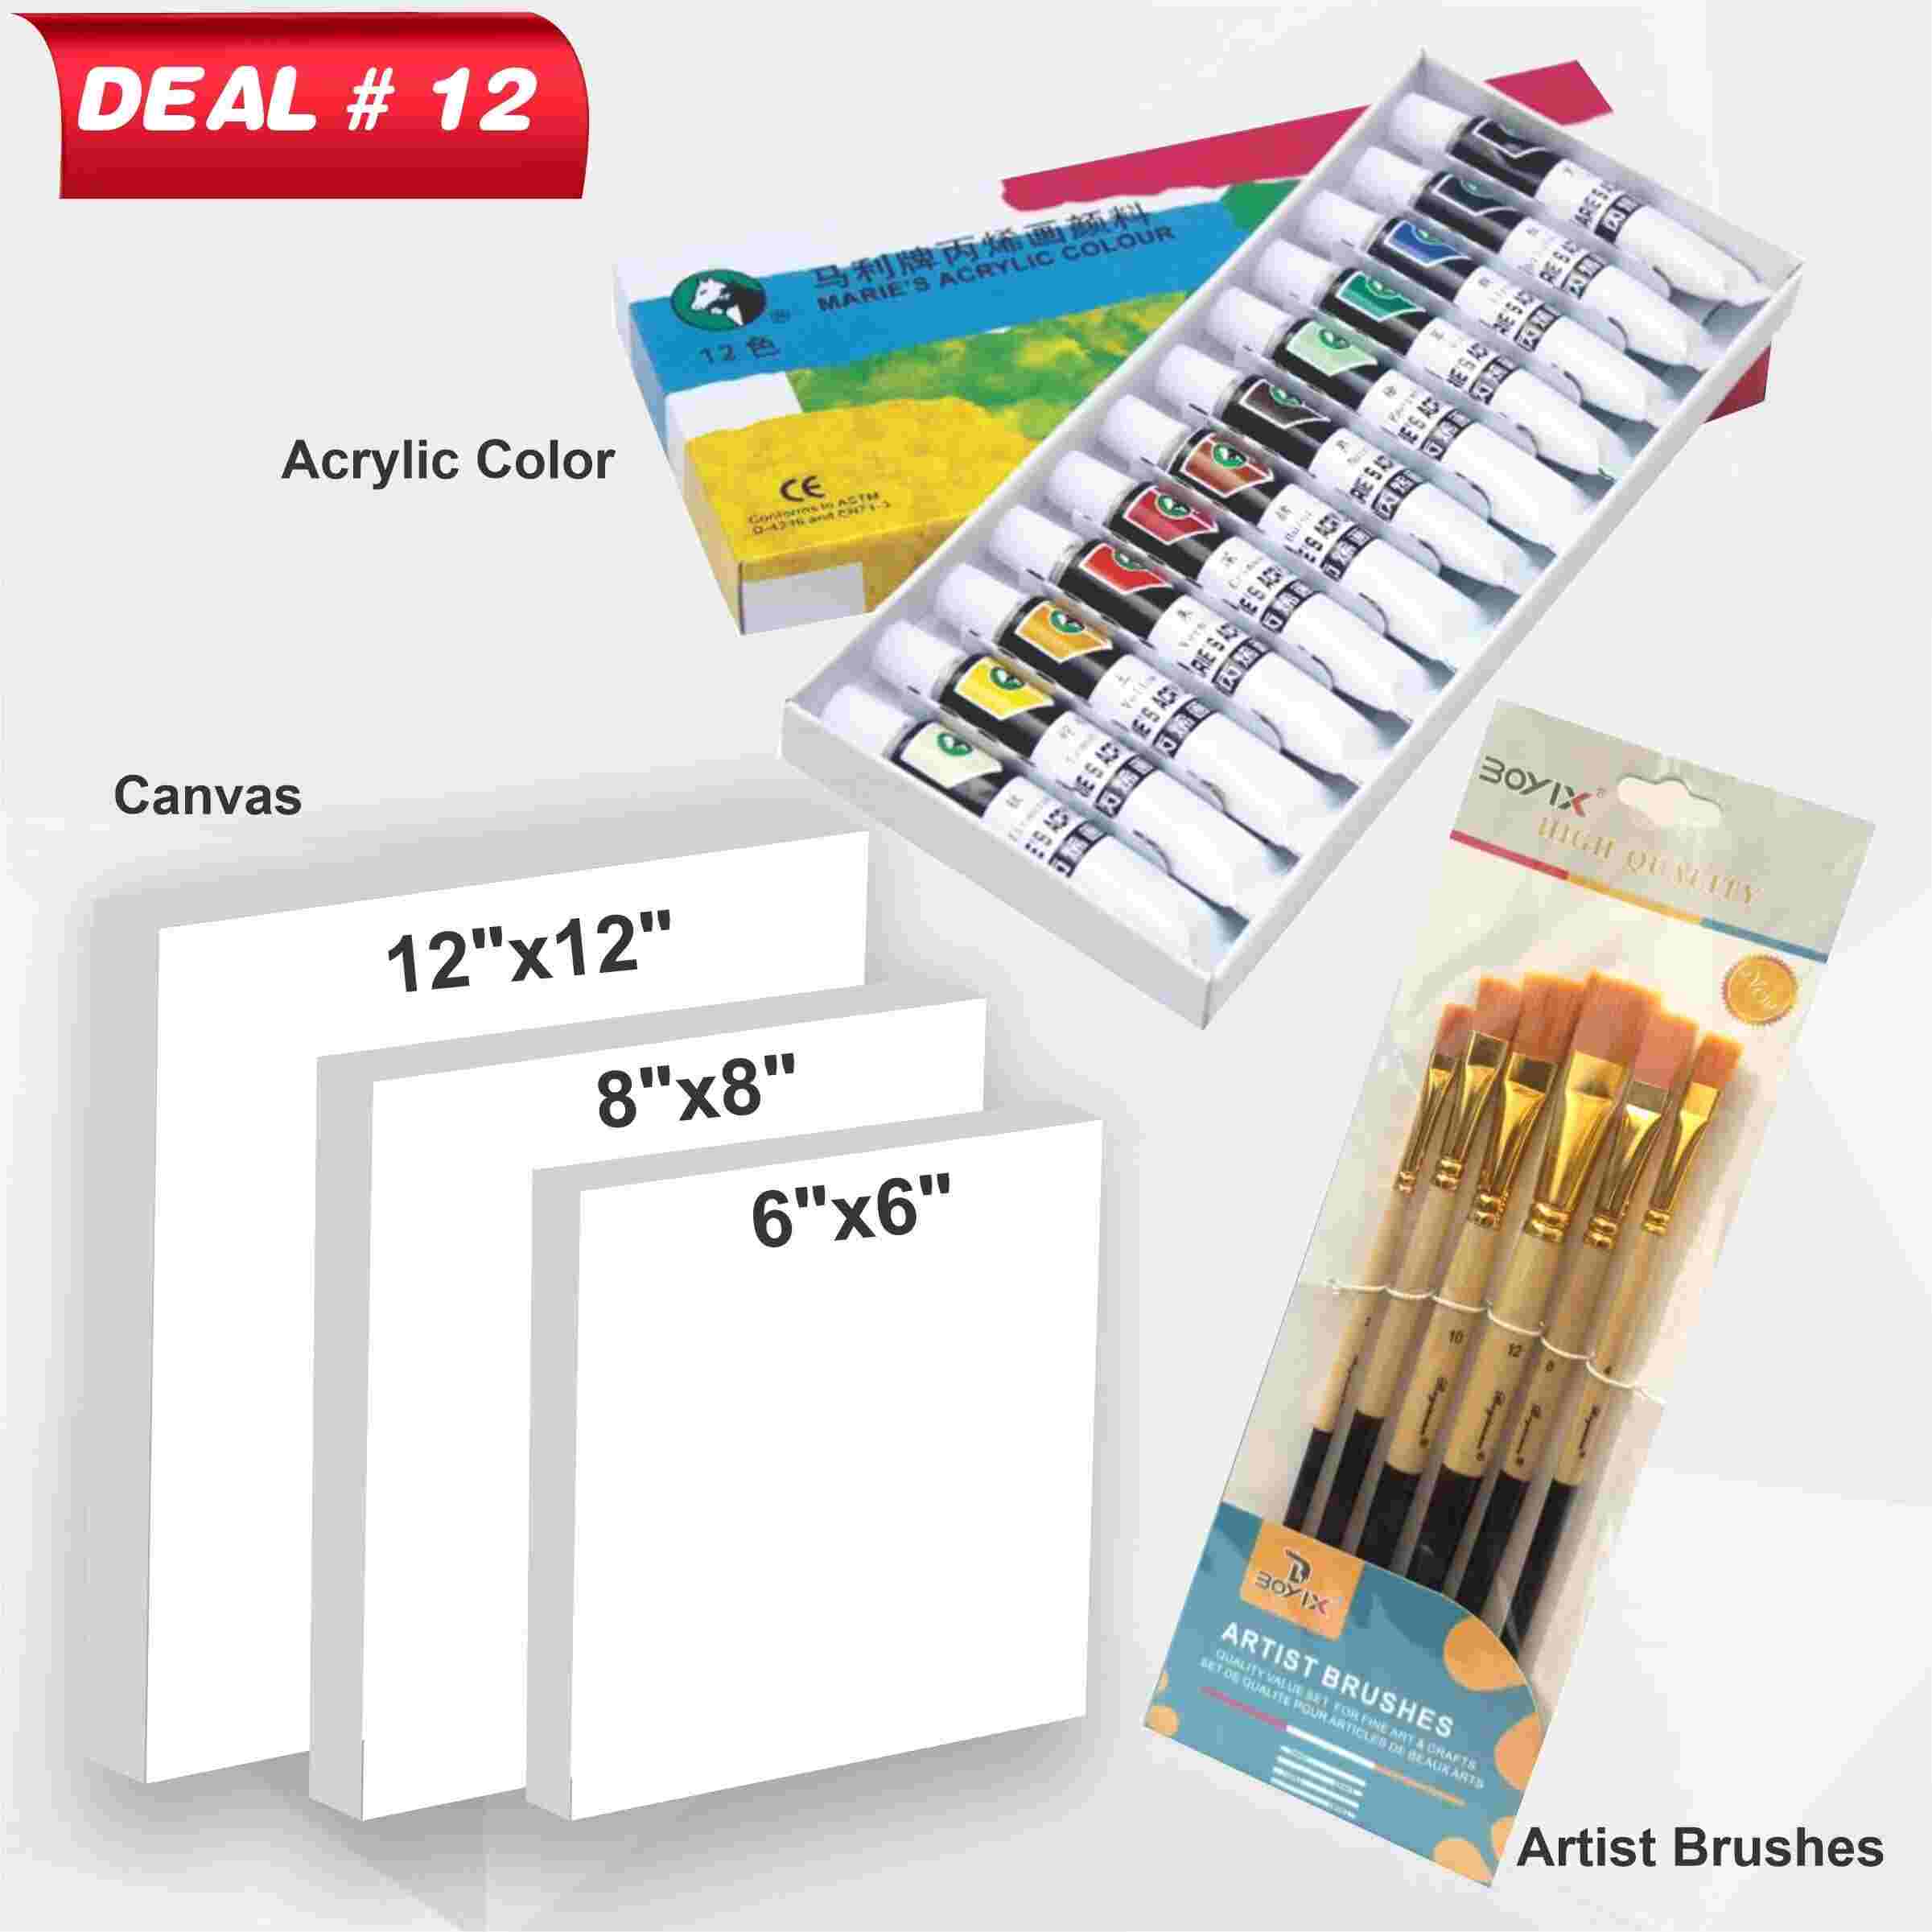 Acrylic Painting Deal No. 12